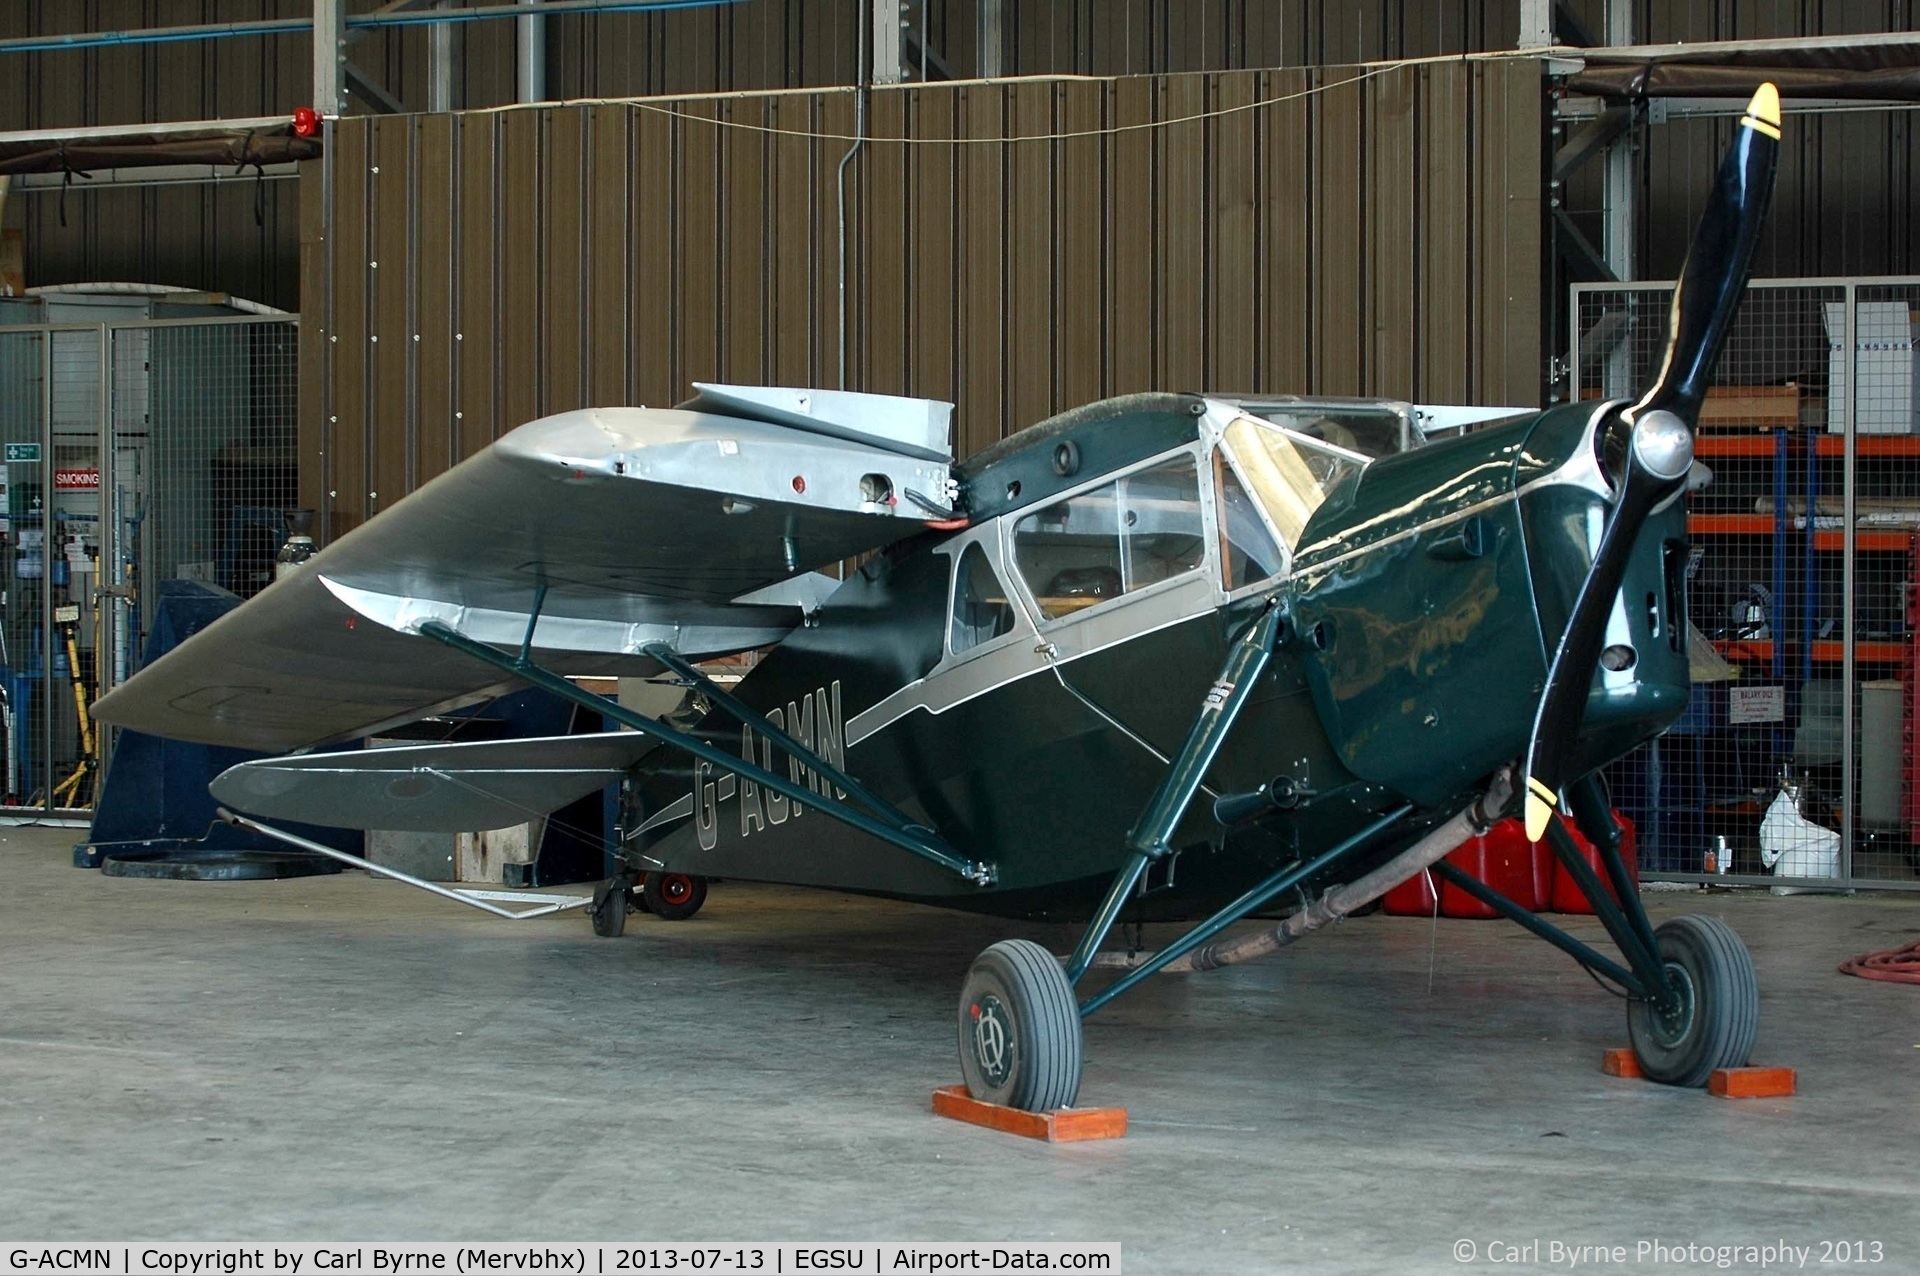 G-ACMN, 1934 De Havilland DH.85 Leopard Moth C/N 7050, Part of the Imperial War Museum's preserved flying collection.